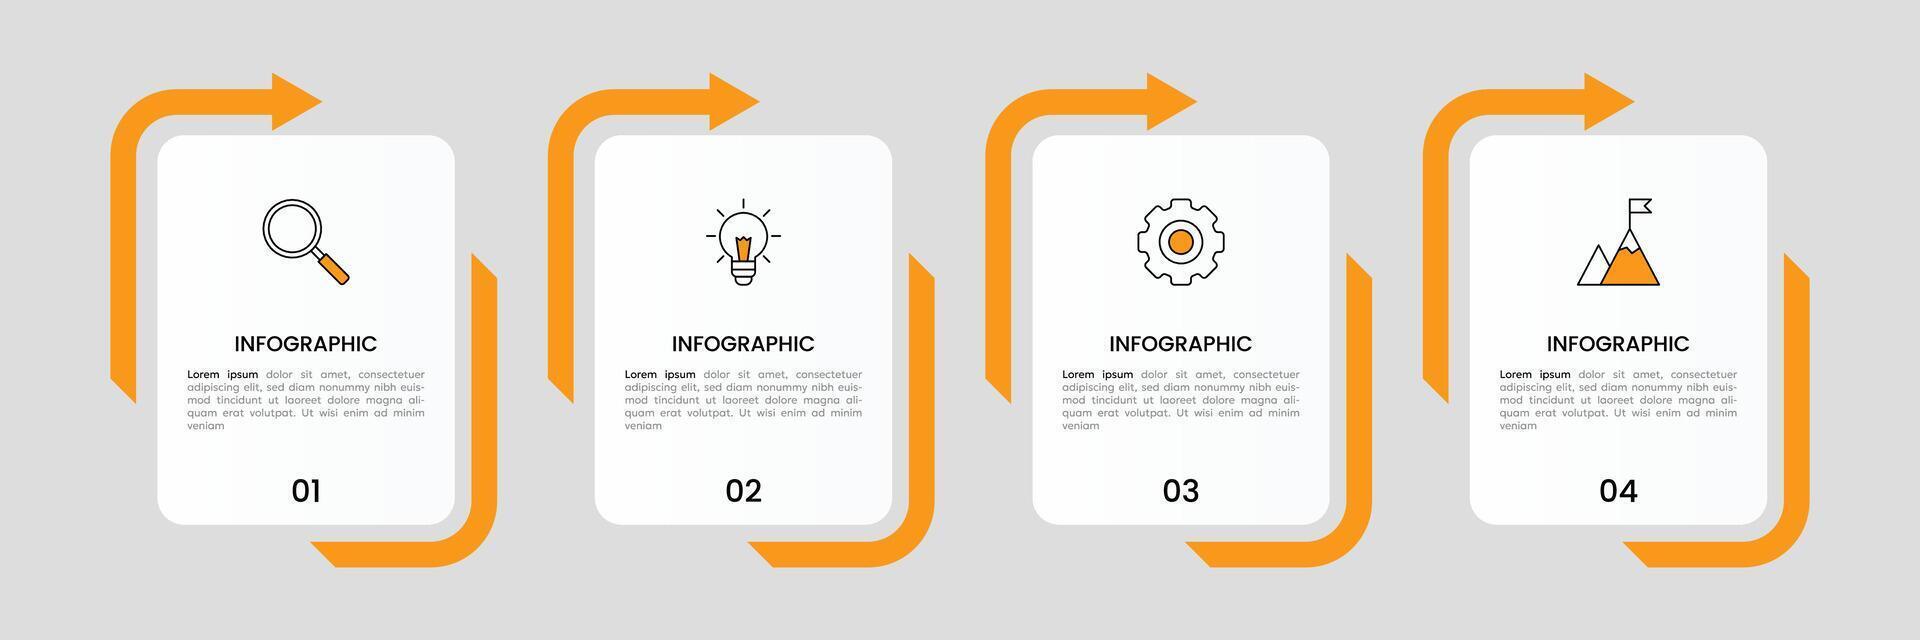 Infographic label design template with icons and 4 options or steps. vector